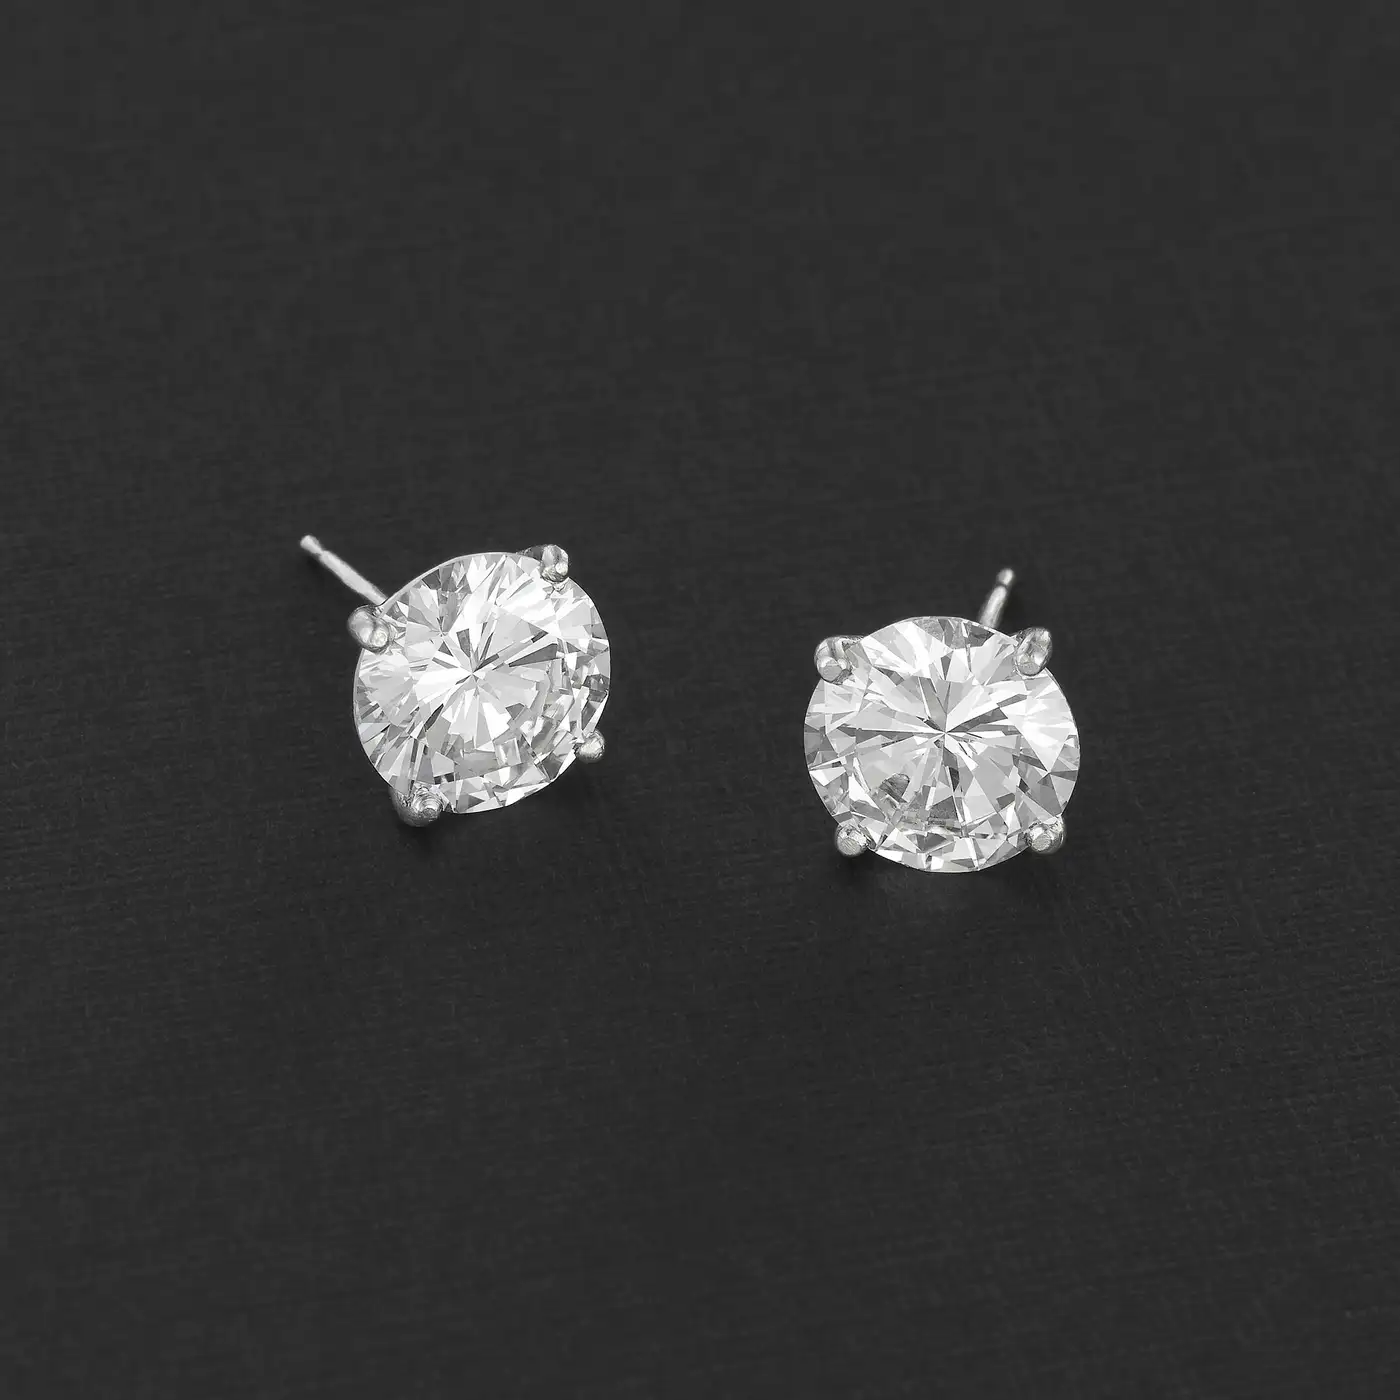 4.10-Carats-Diamond-Stud-Earrings-Round-Brilliant-in-White-Gold-GIA-Certified-3.webp